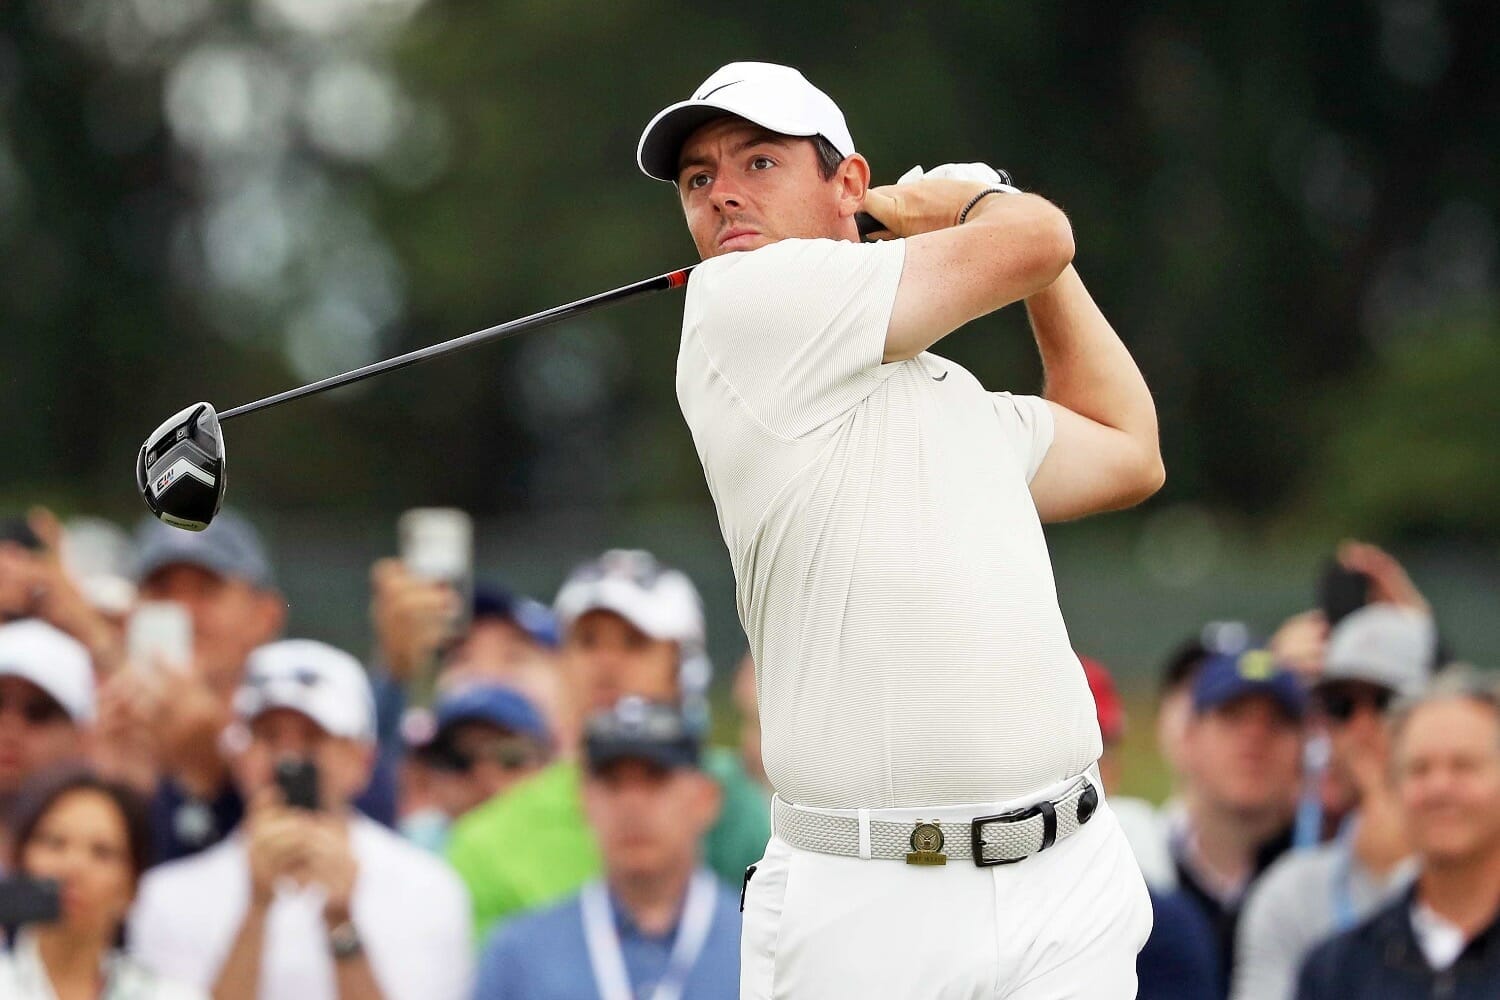 McIlroy defends criticism of his form ahead of Irish Open